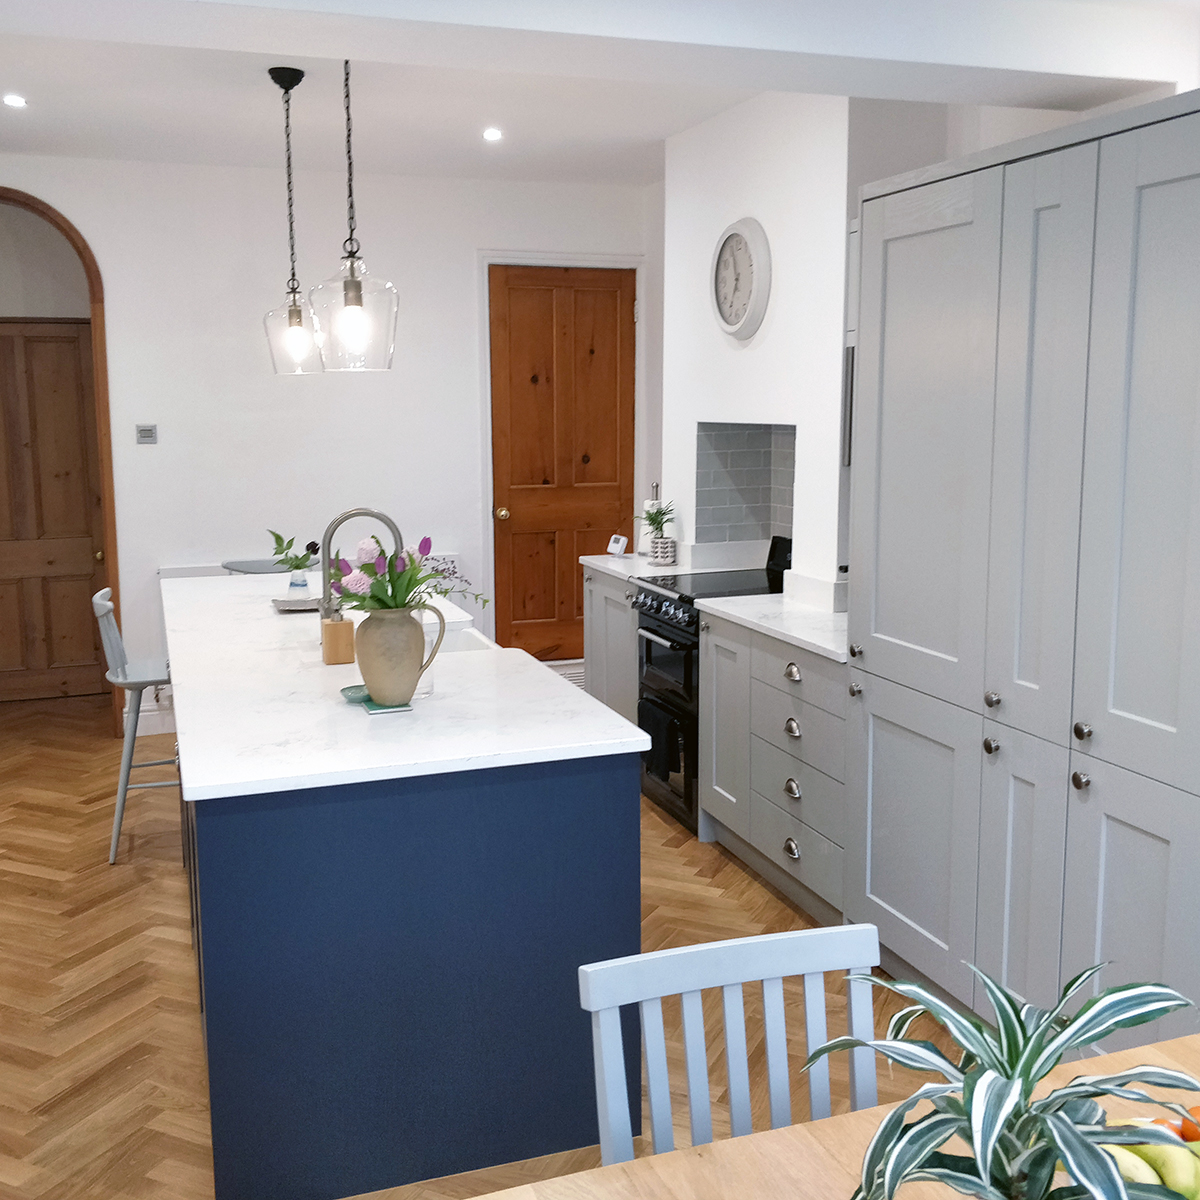 Our Henley-in-Arden team recently designed and supplied this stunning #kitchen to a home in #Harborne.

✅ Units: Symphony Milano
✅ Doors: Ashbourne 🎨Pearl Grey & Painted Indigo
✅ Worktops: Bellagio Italian Collection 🎨Capri

Get in touch with our experts 👉info@ehsmith.co.uk